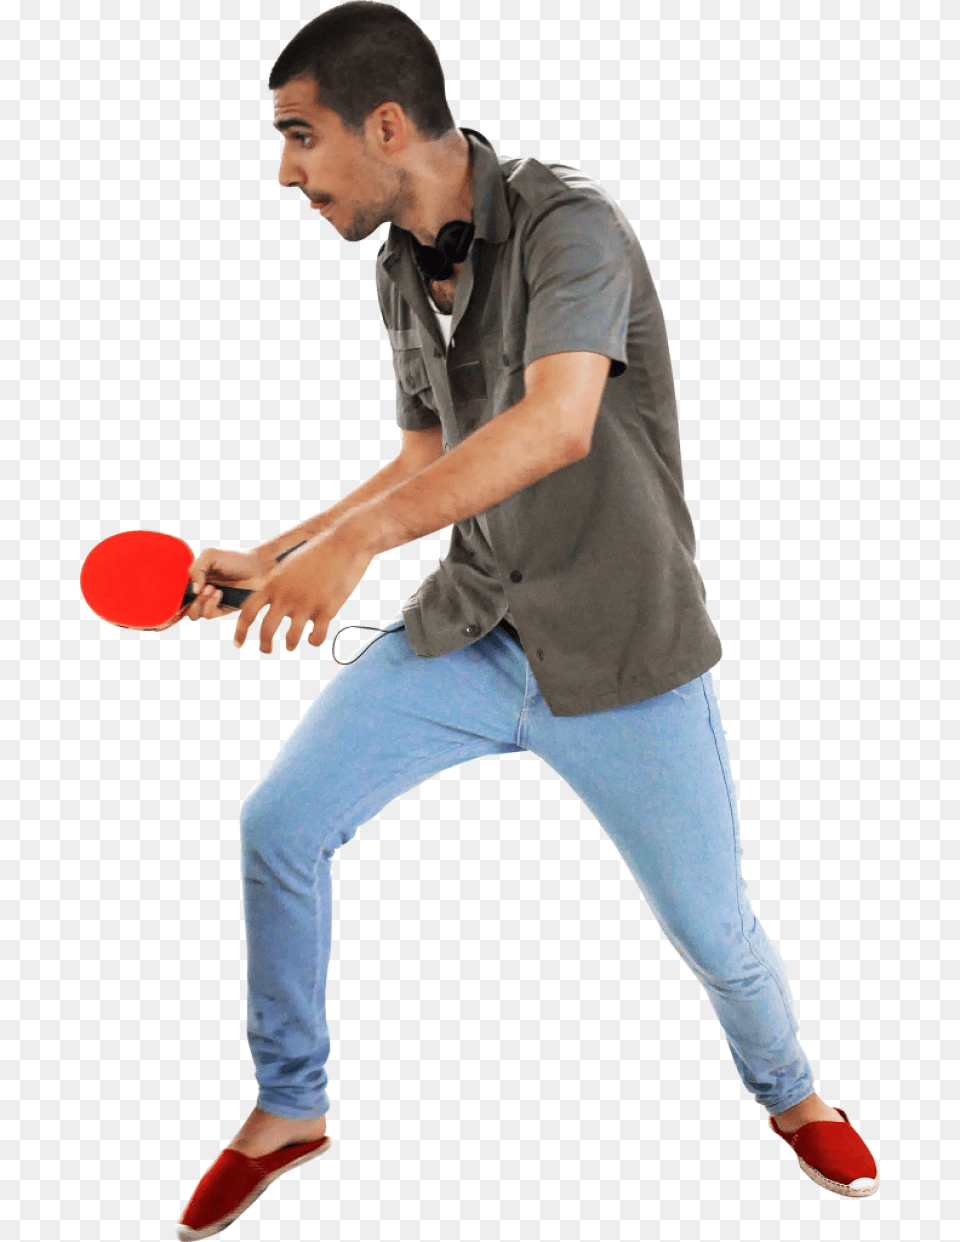 Playing Ping Pong, Adult, Male, Man, Person Png Image